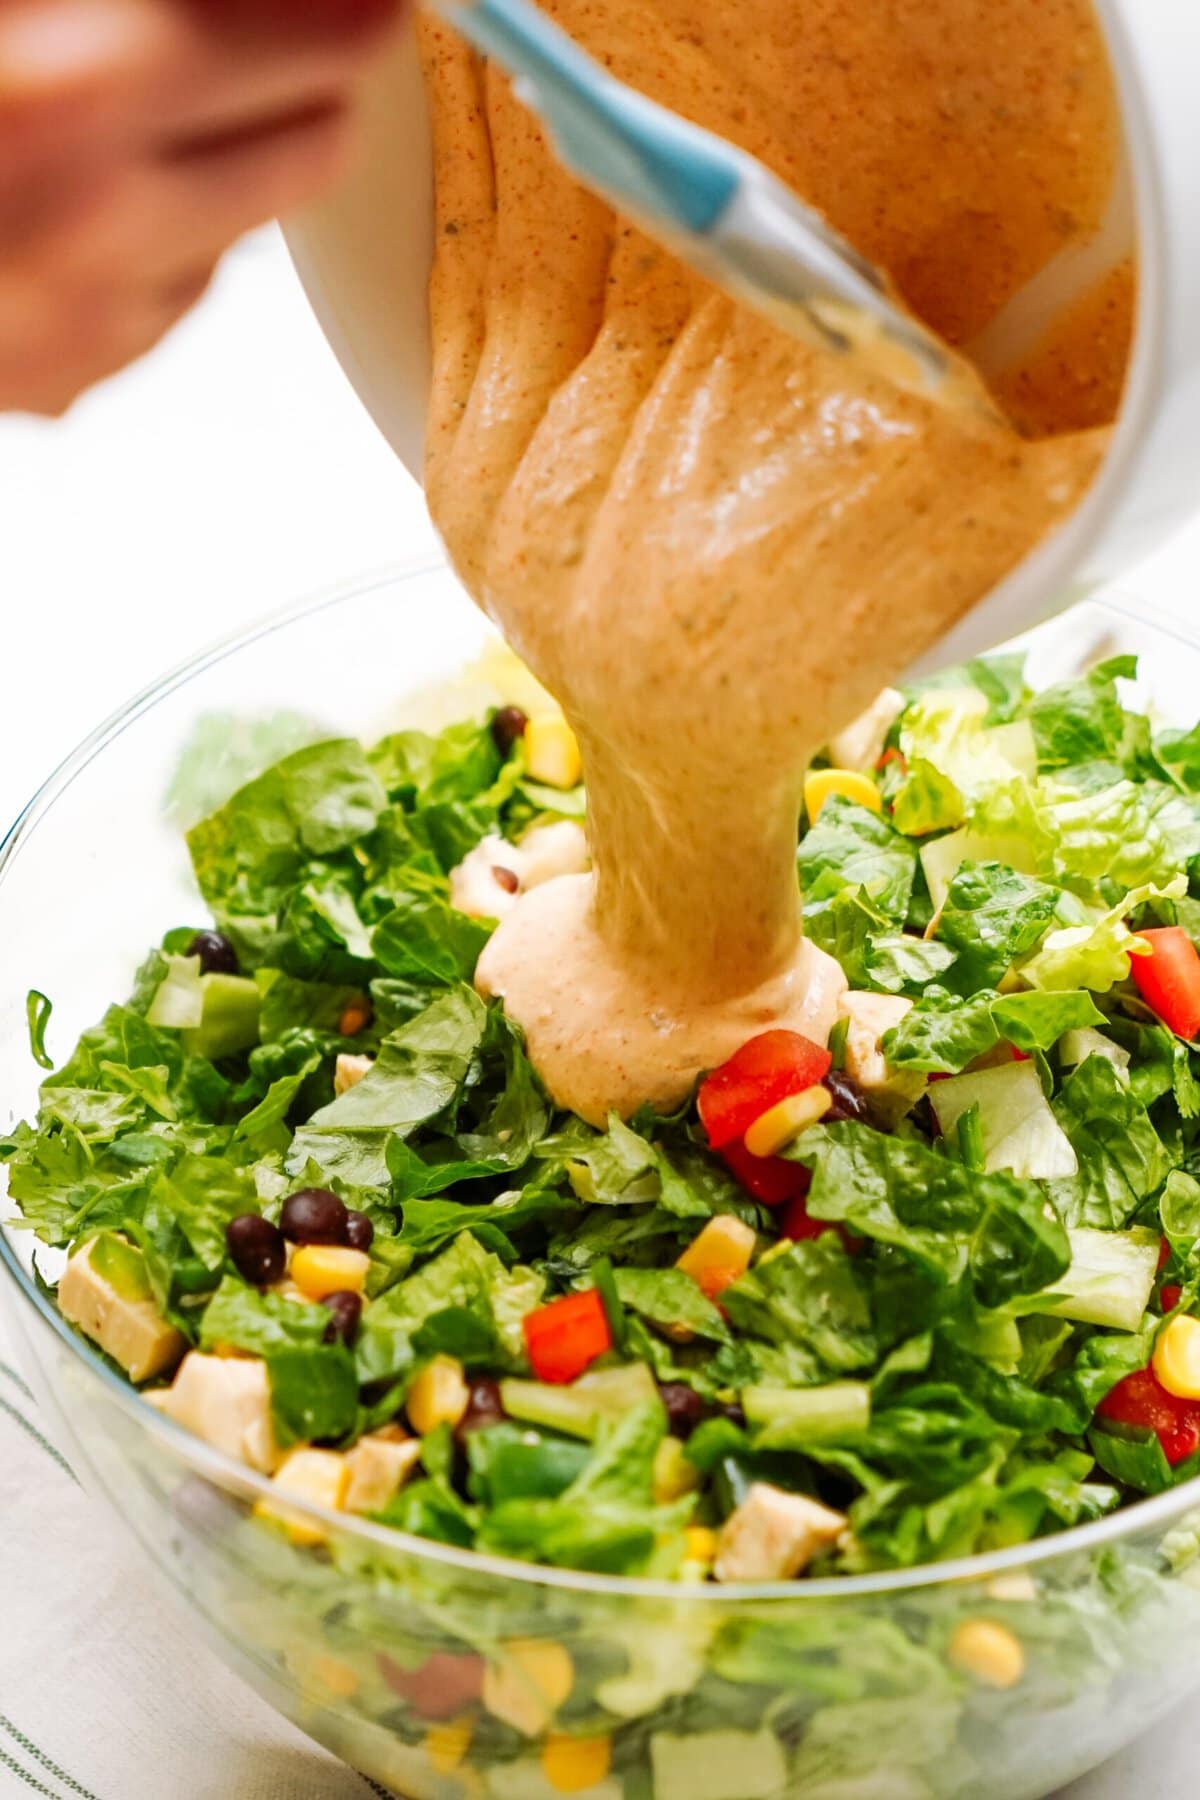 Pouring dressing on a southwest salad.